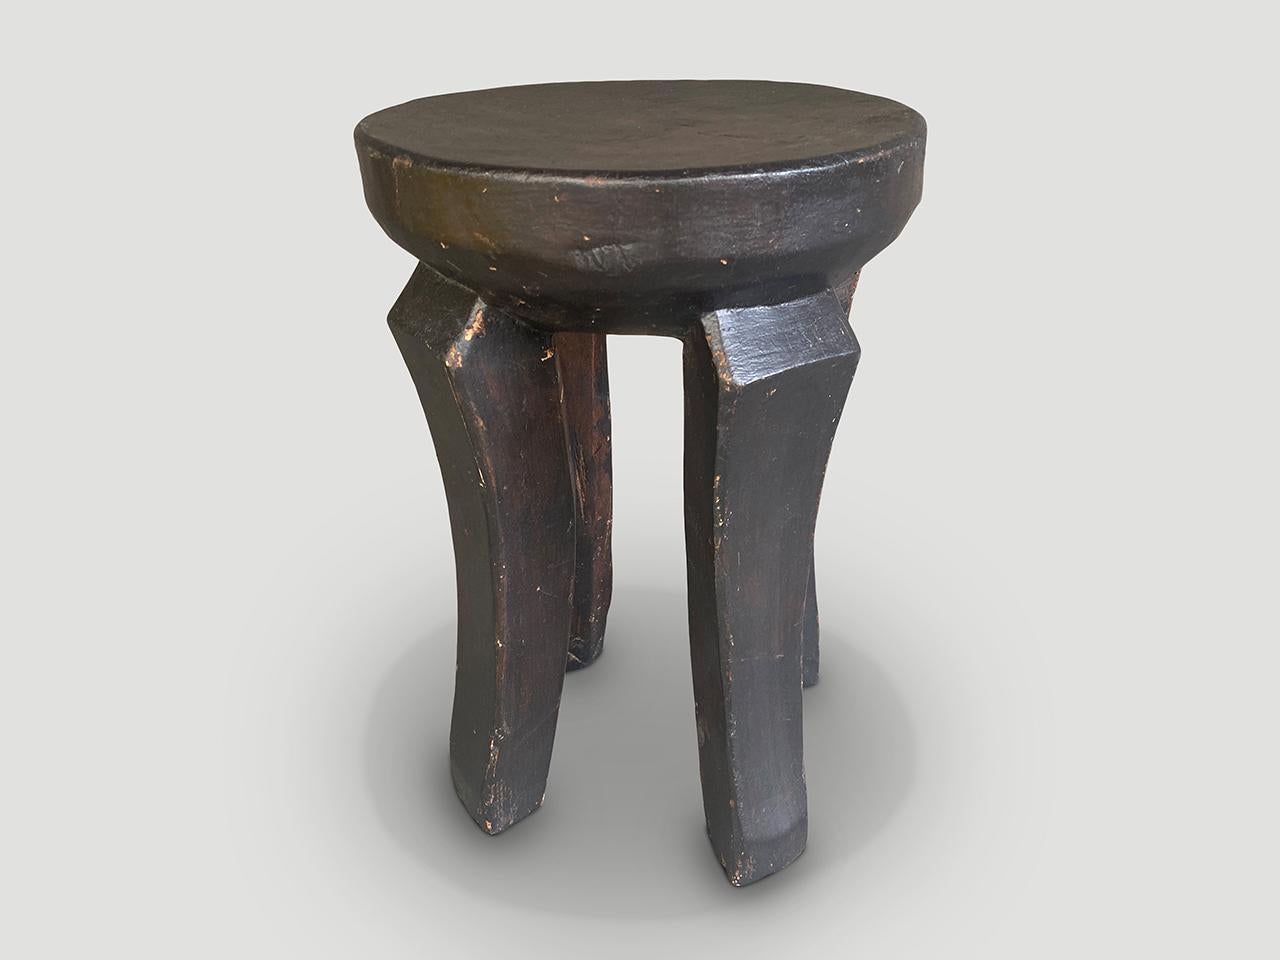 Ivorian Andrianna Shamaris African Side Table or Stool